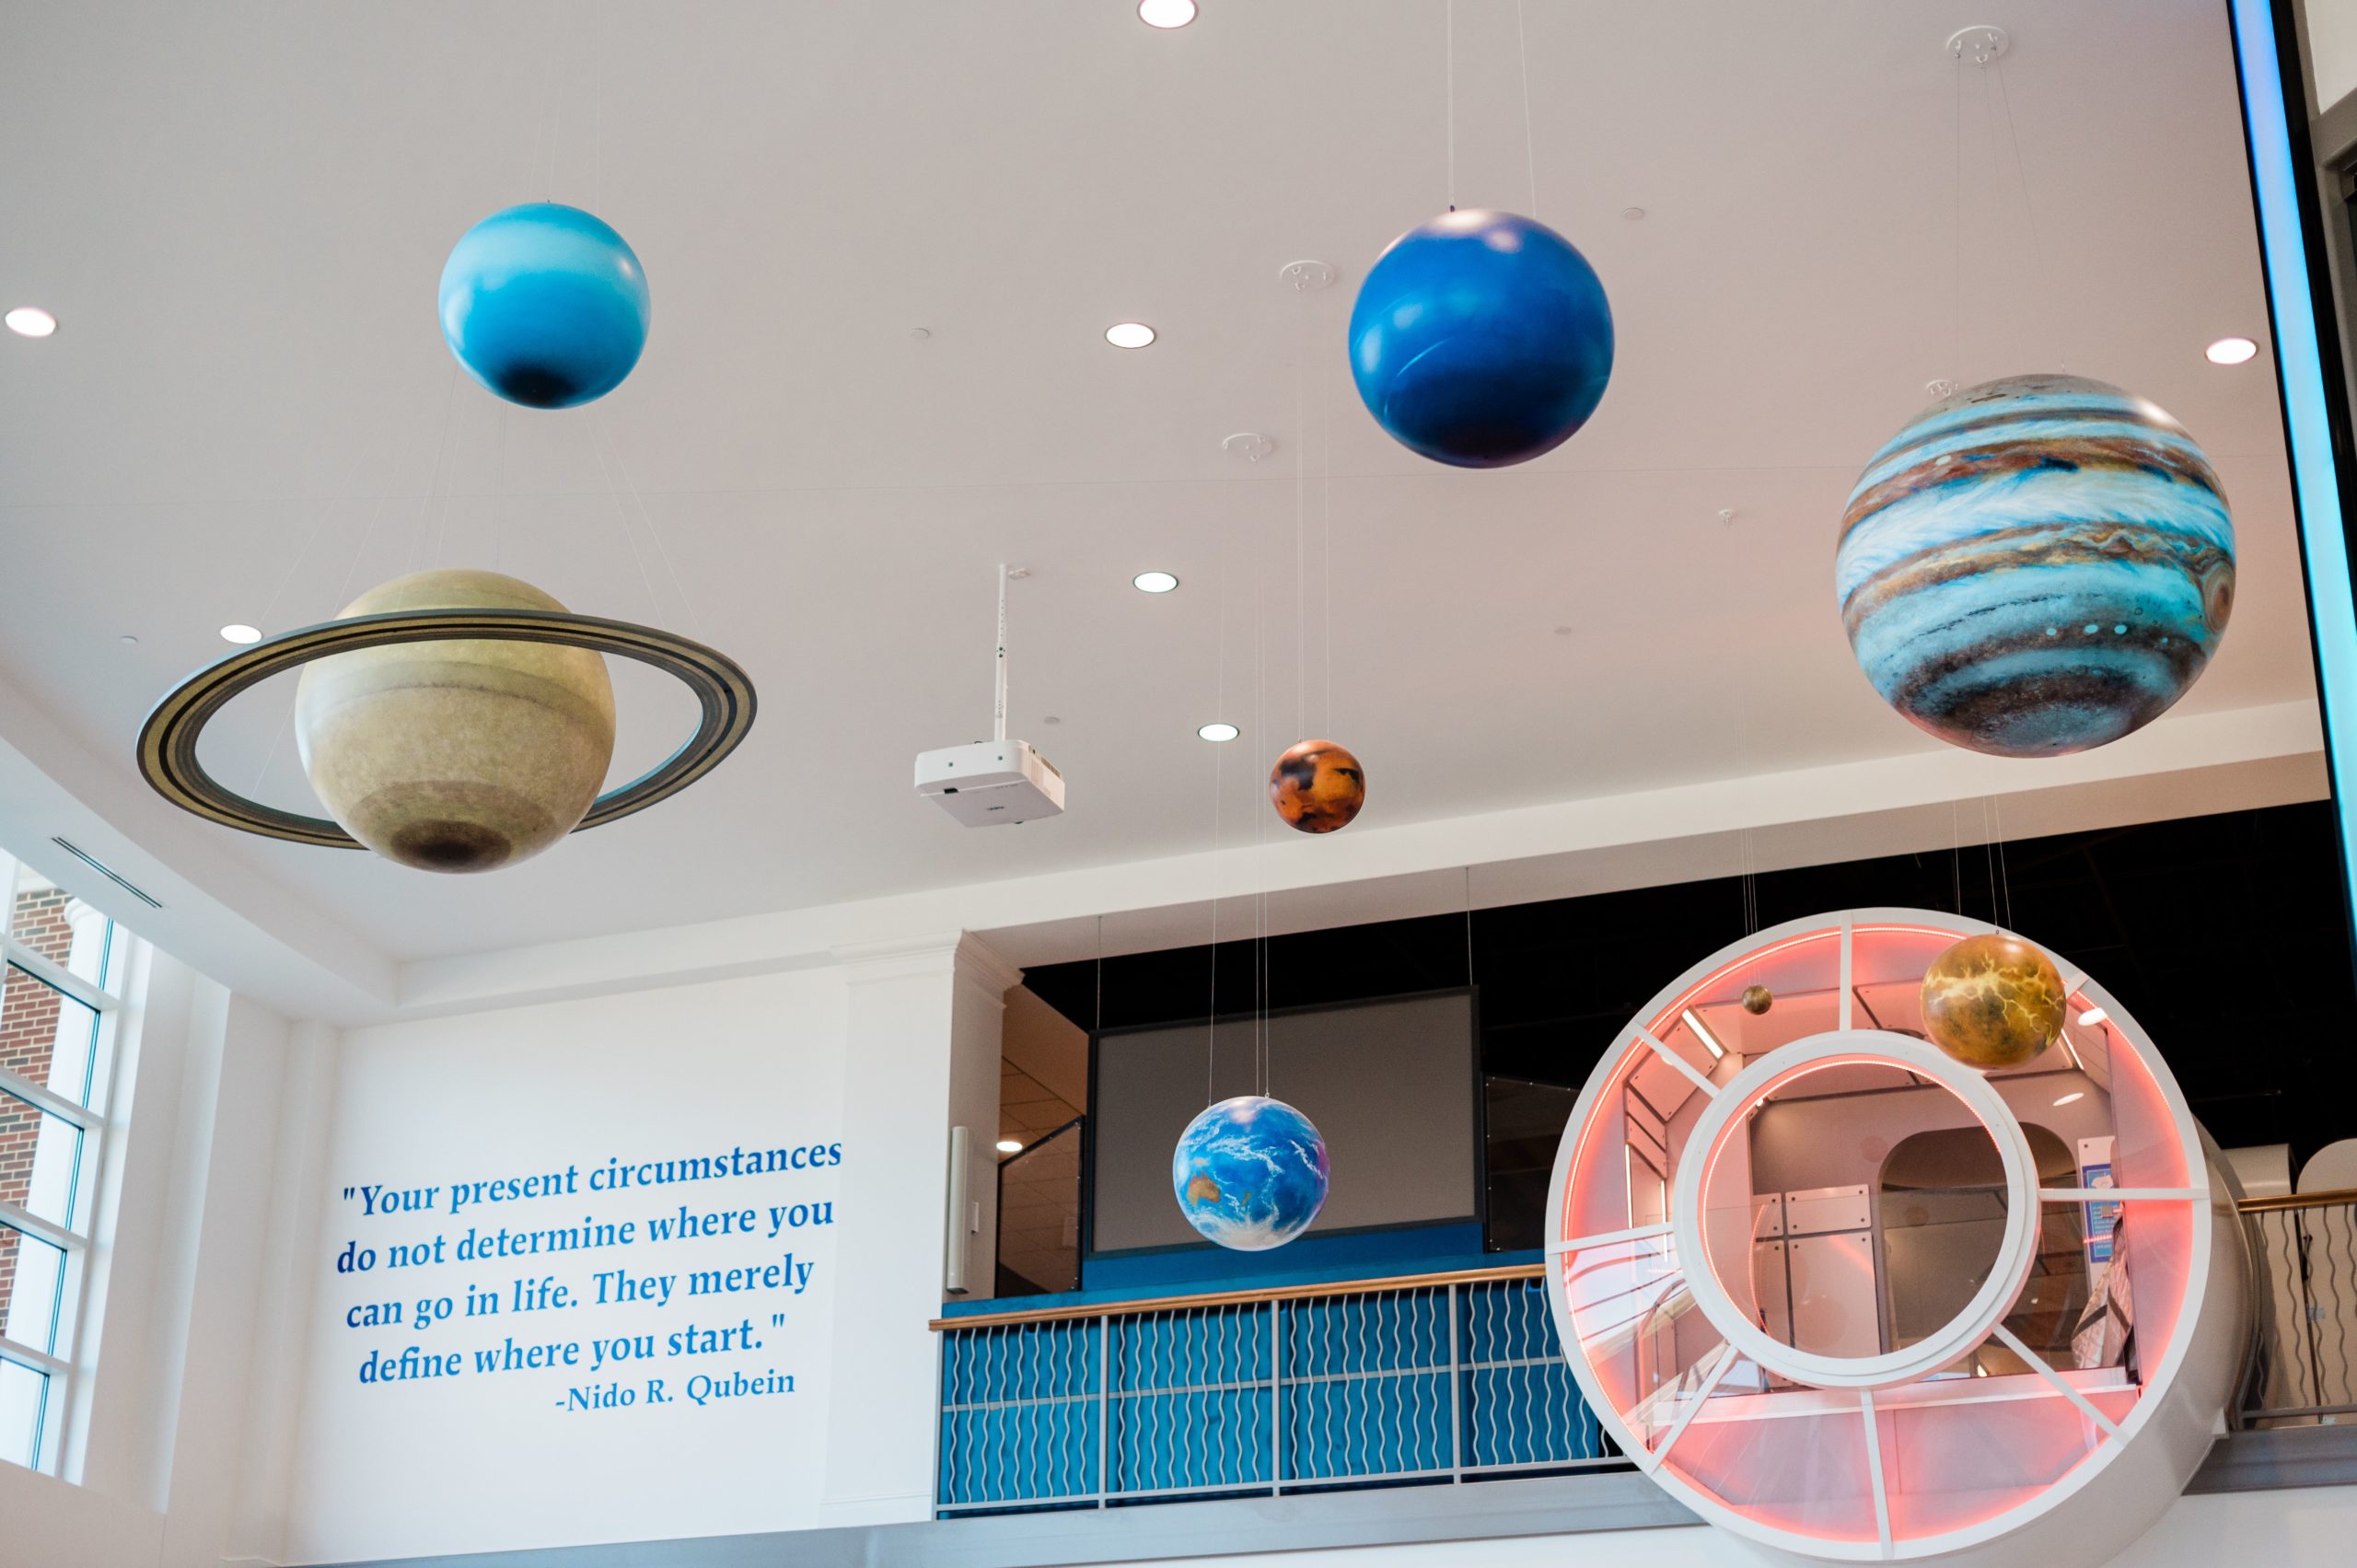 The Gallery at the Nido & Mariana Qubein Children's Museum in High Point has a quote from Dr. Nido Qubein and hanging planets.